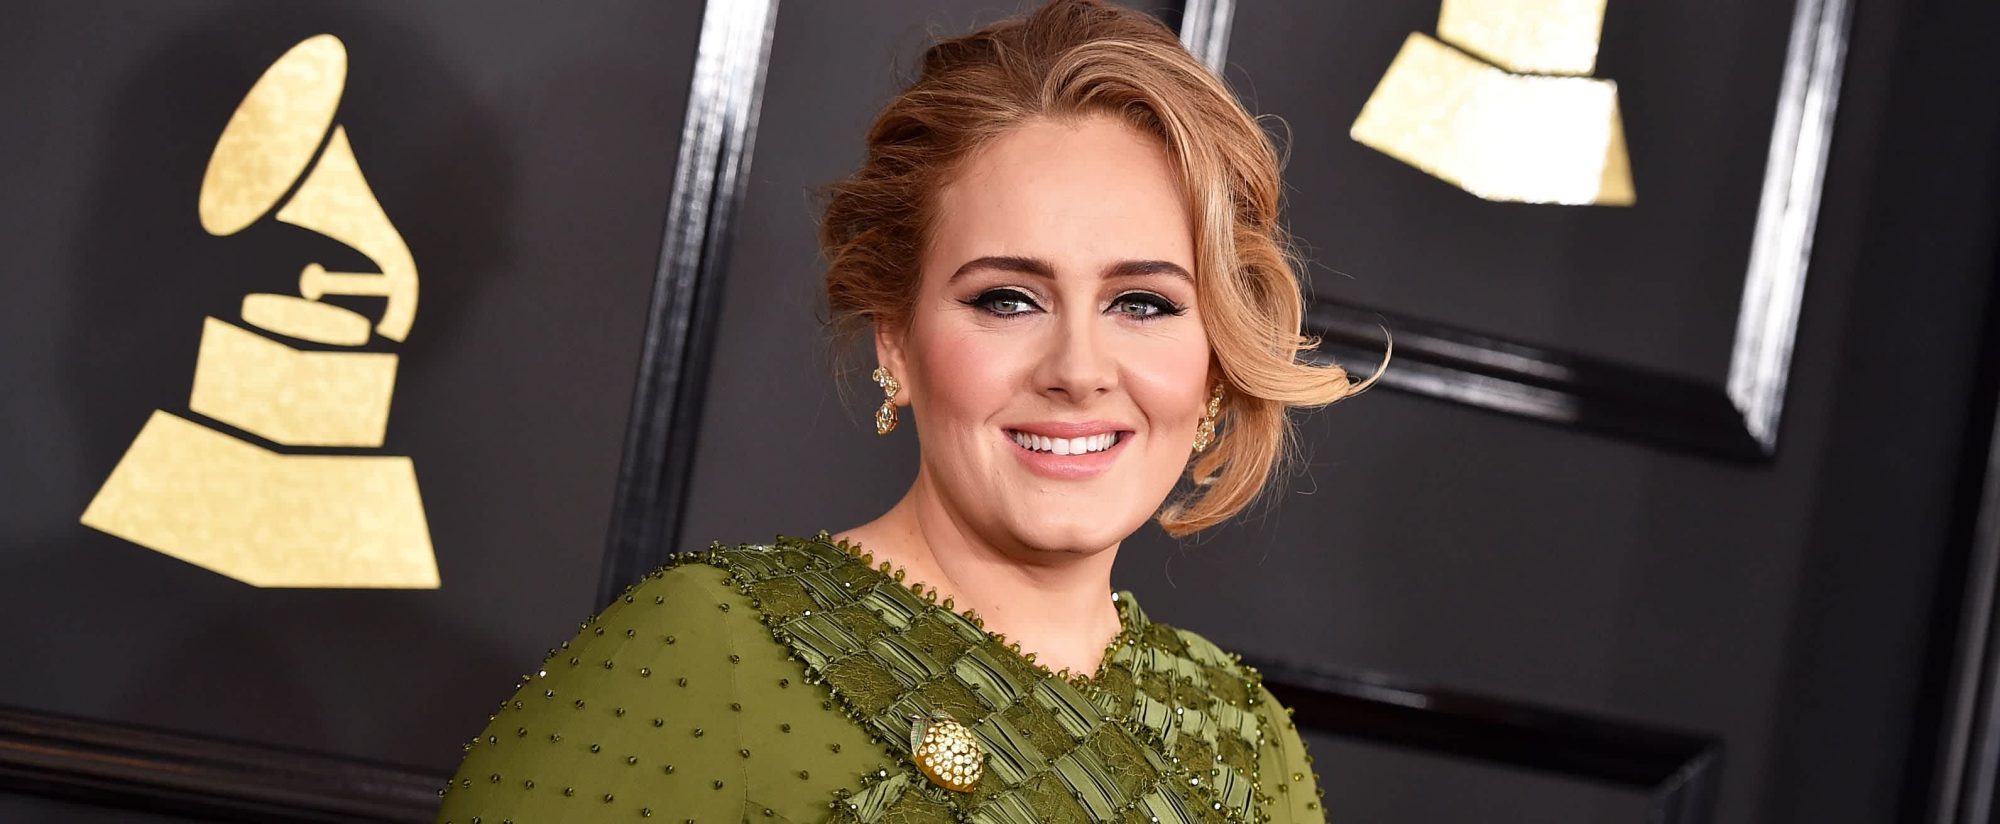 Hello, It's Adele's Birth Chart, and We're Rolling Deep Into the Singer